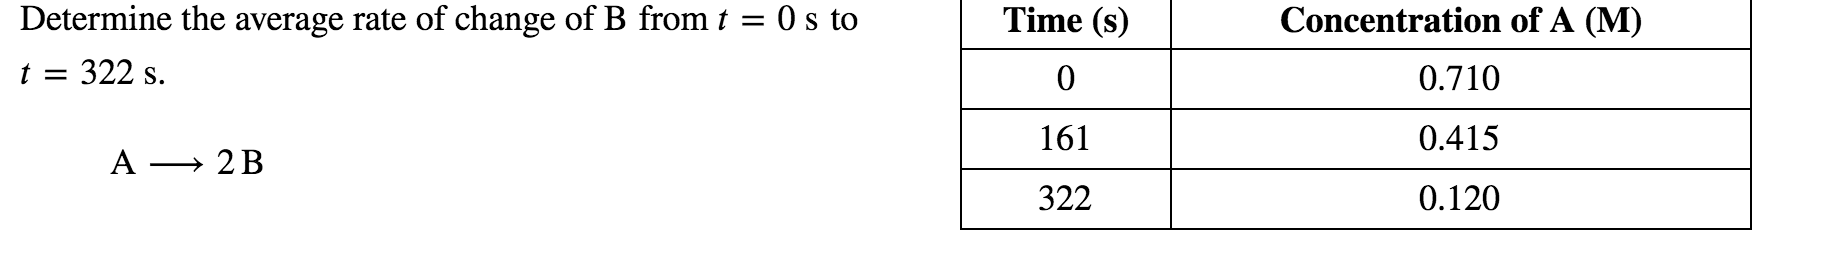 Time (s)
Concentration of A (M)
Determine the average rate of change of B from t = 0 s to
:322 s.
0.710
161
0.415
A → 2B
322
0.120
